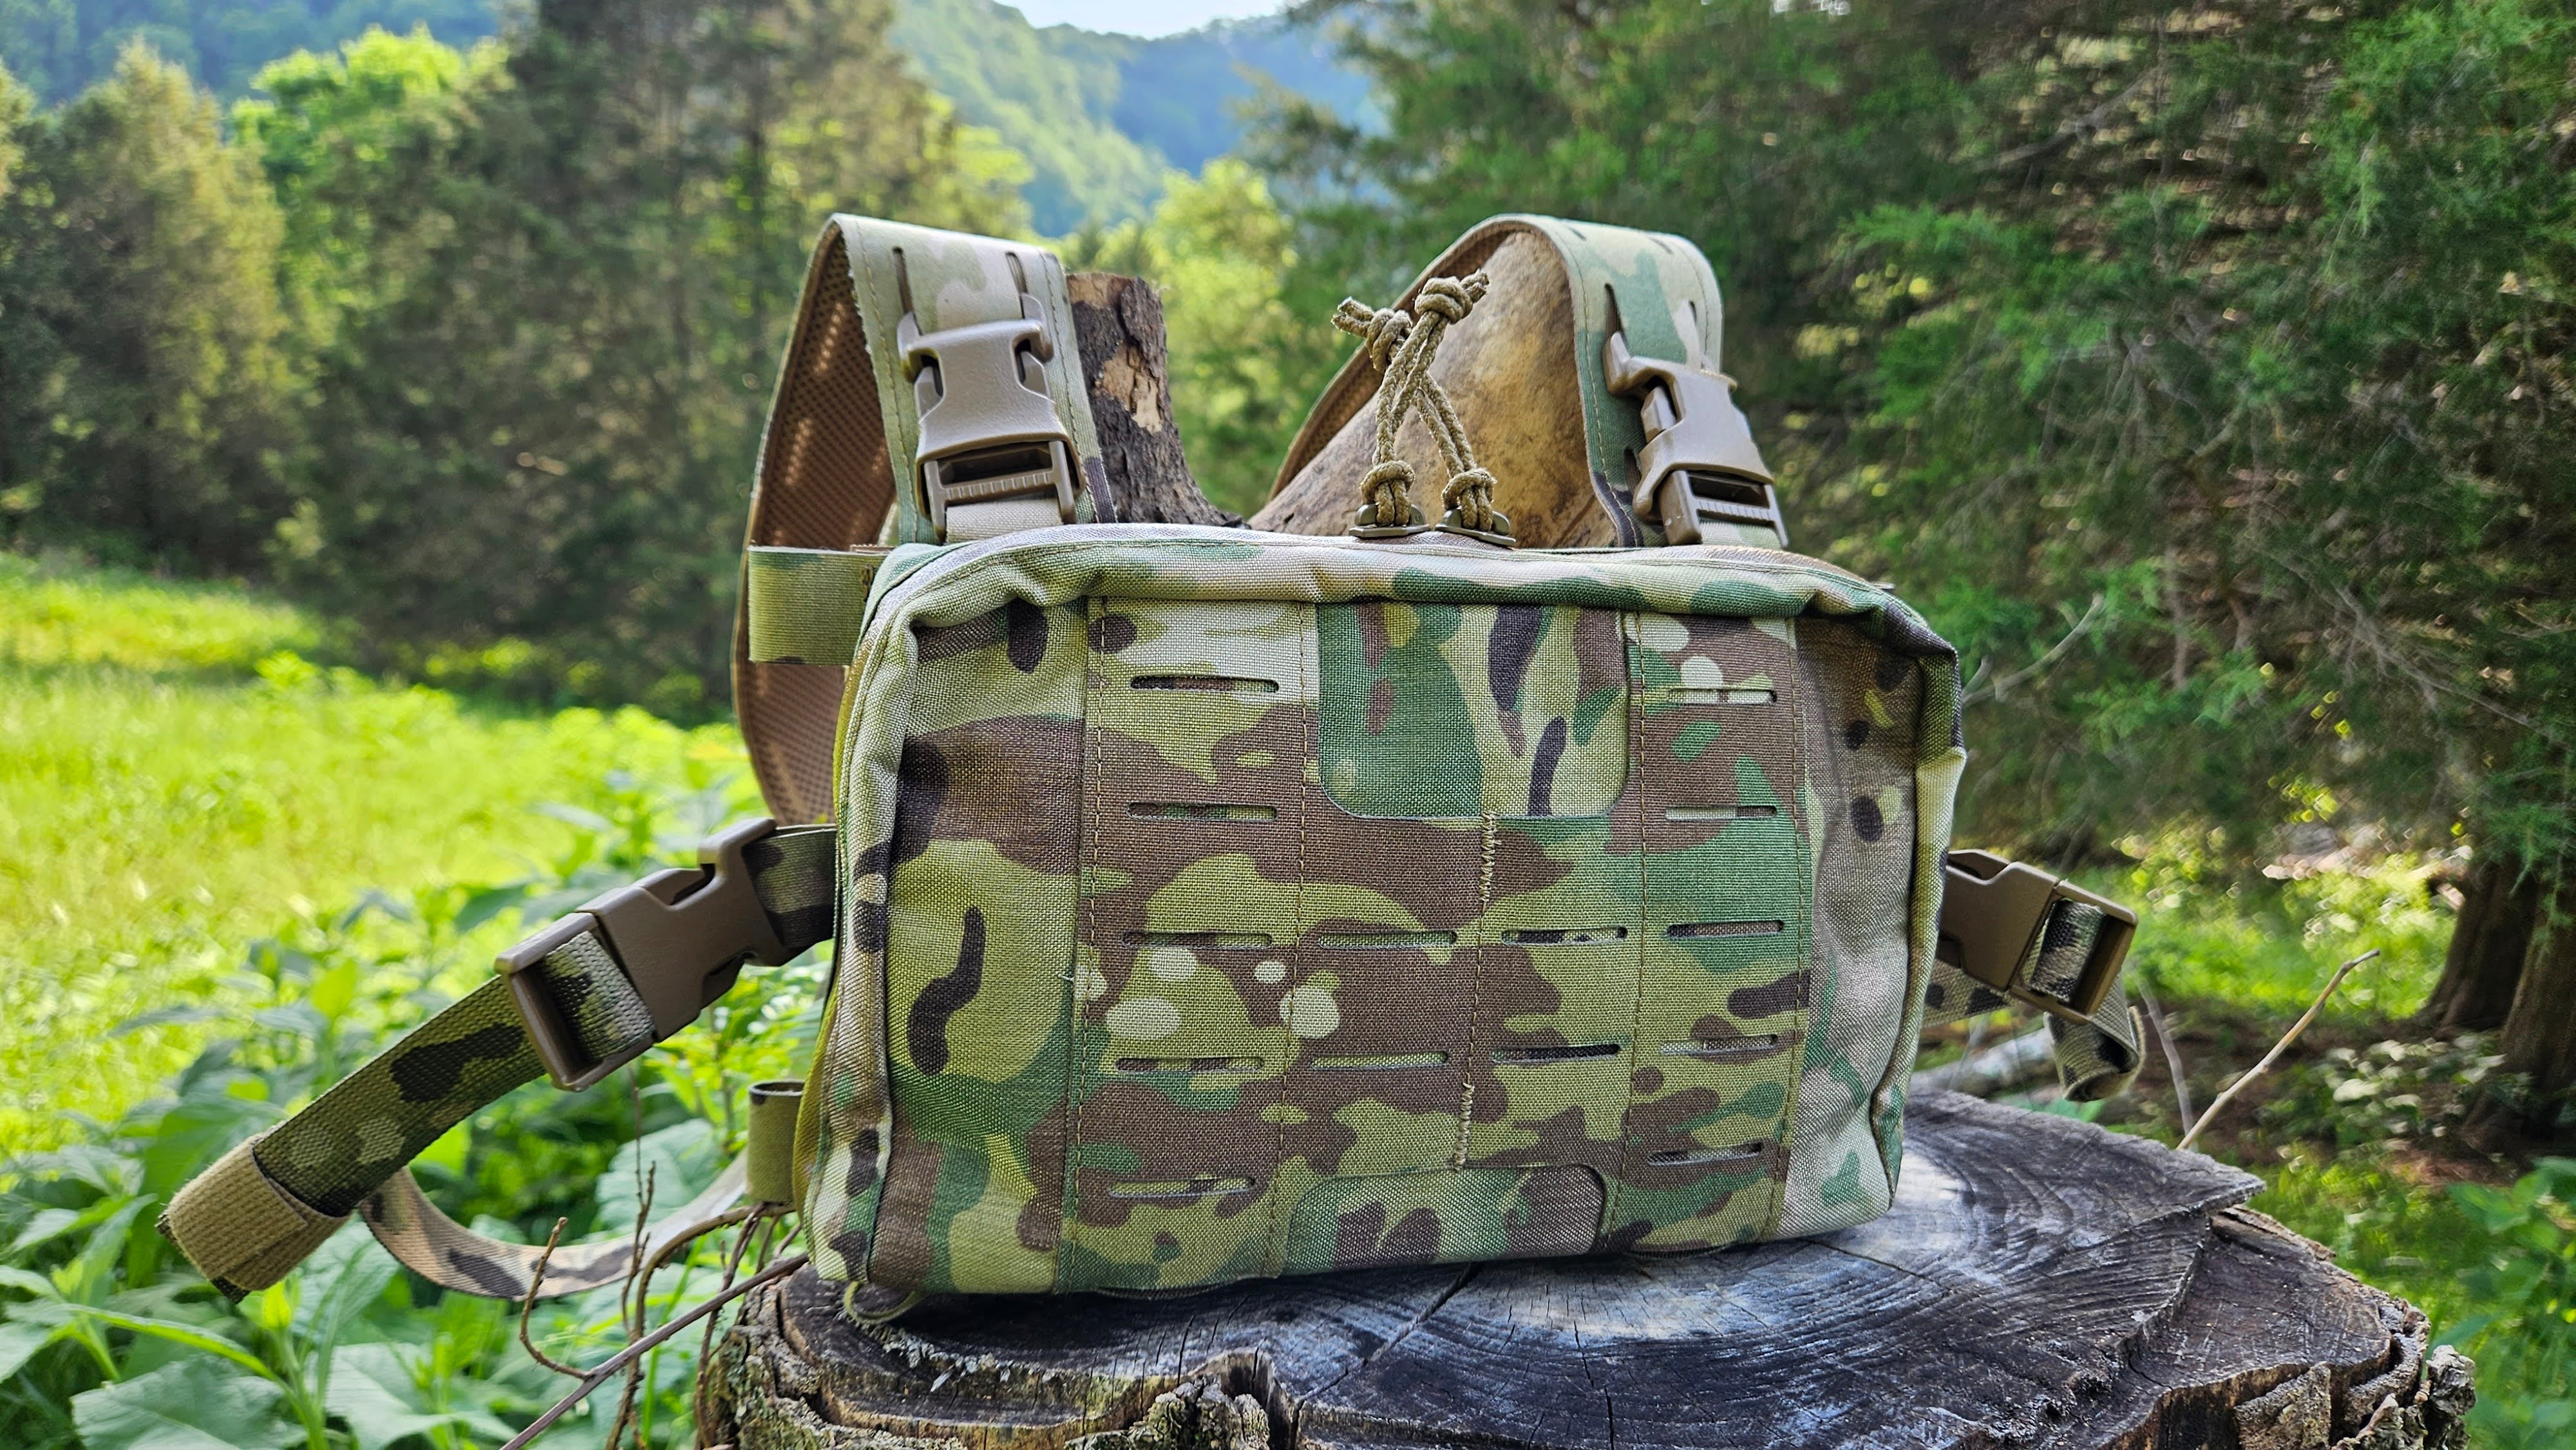 Non-tactical chest rigs? Specifically a modular option to add to